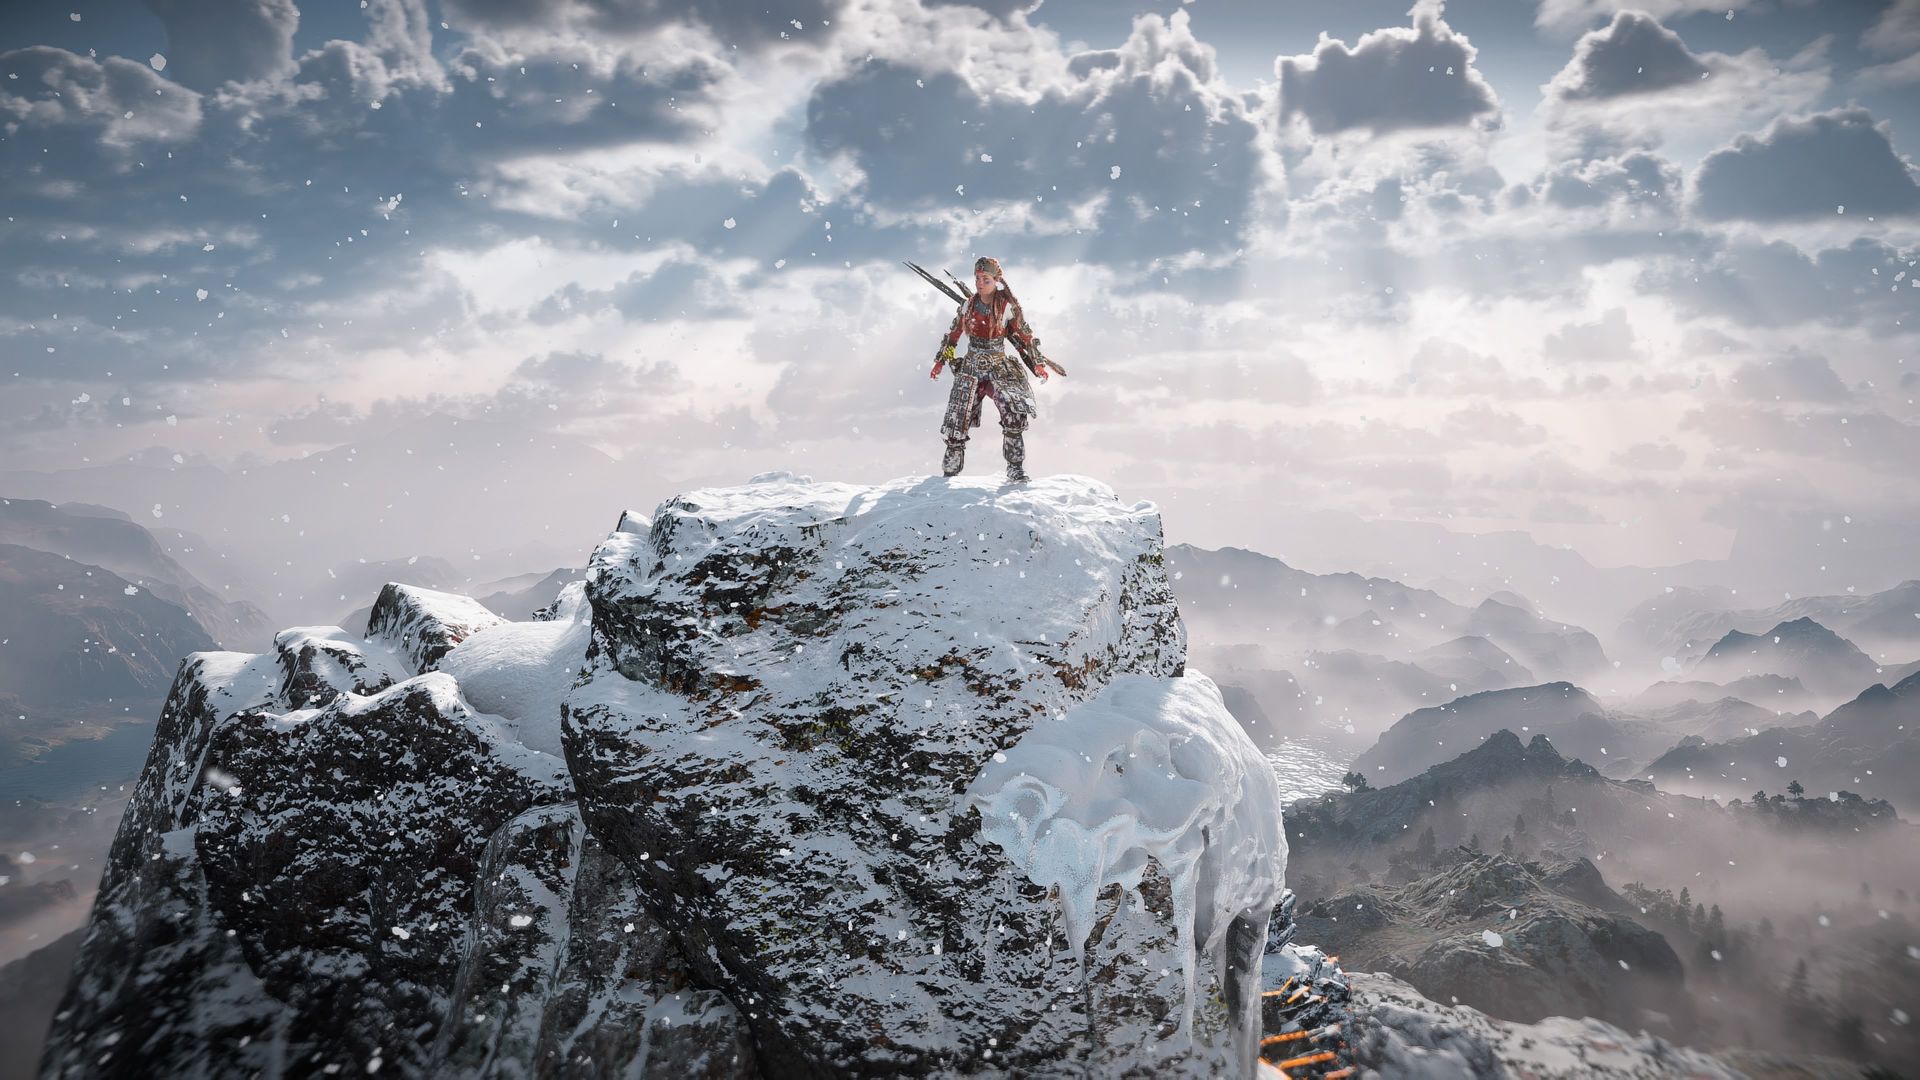 Video game screenshot of a warrior woman standing on a snowy mountaintop with sunrays beaming through clouds above her